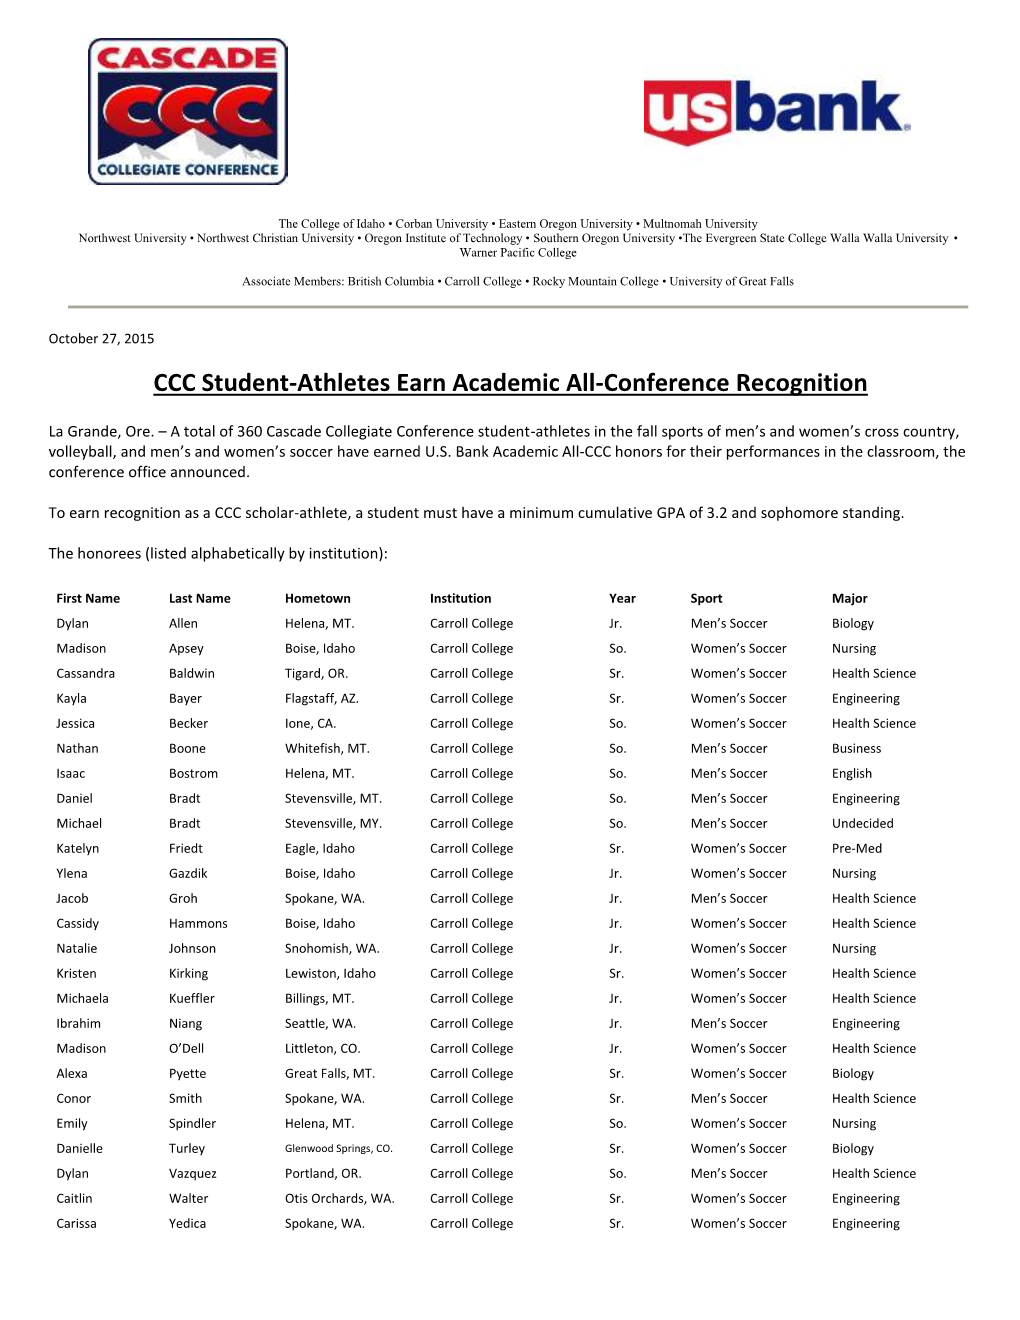 CCC Student-Athletes Earn Academic All-Conference Recognition